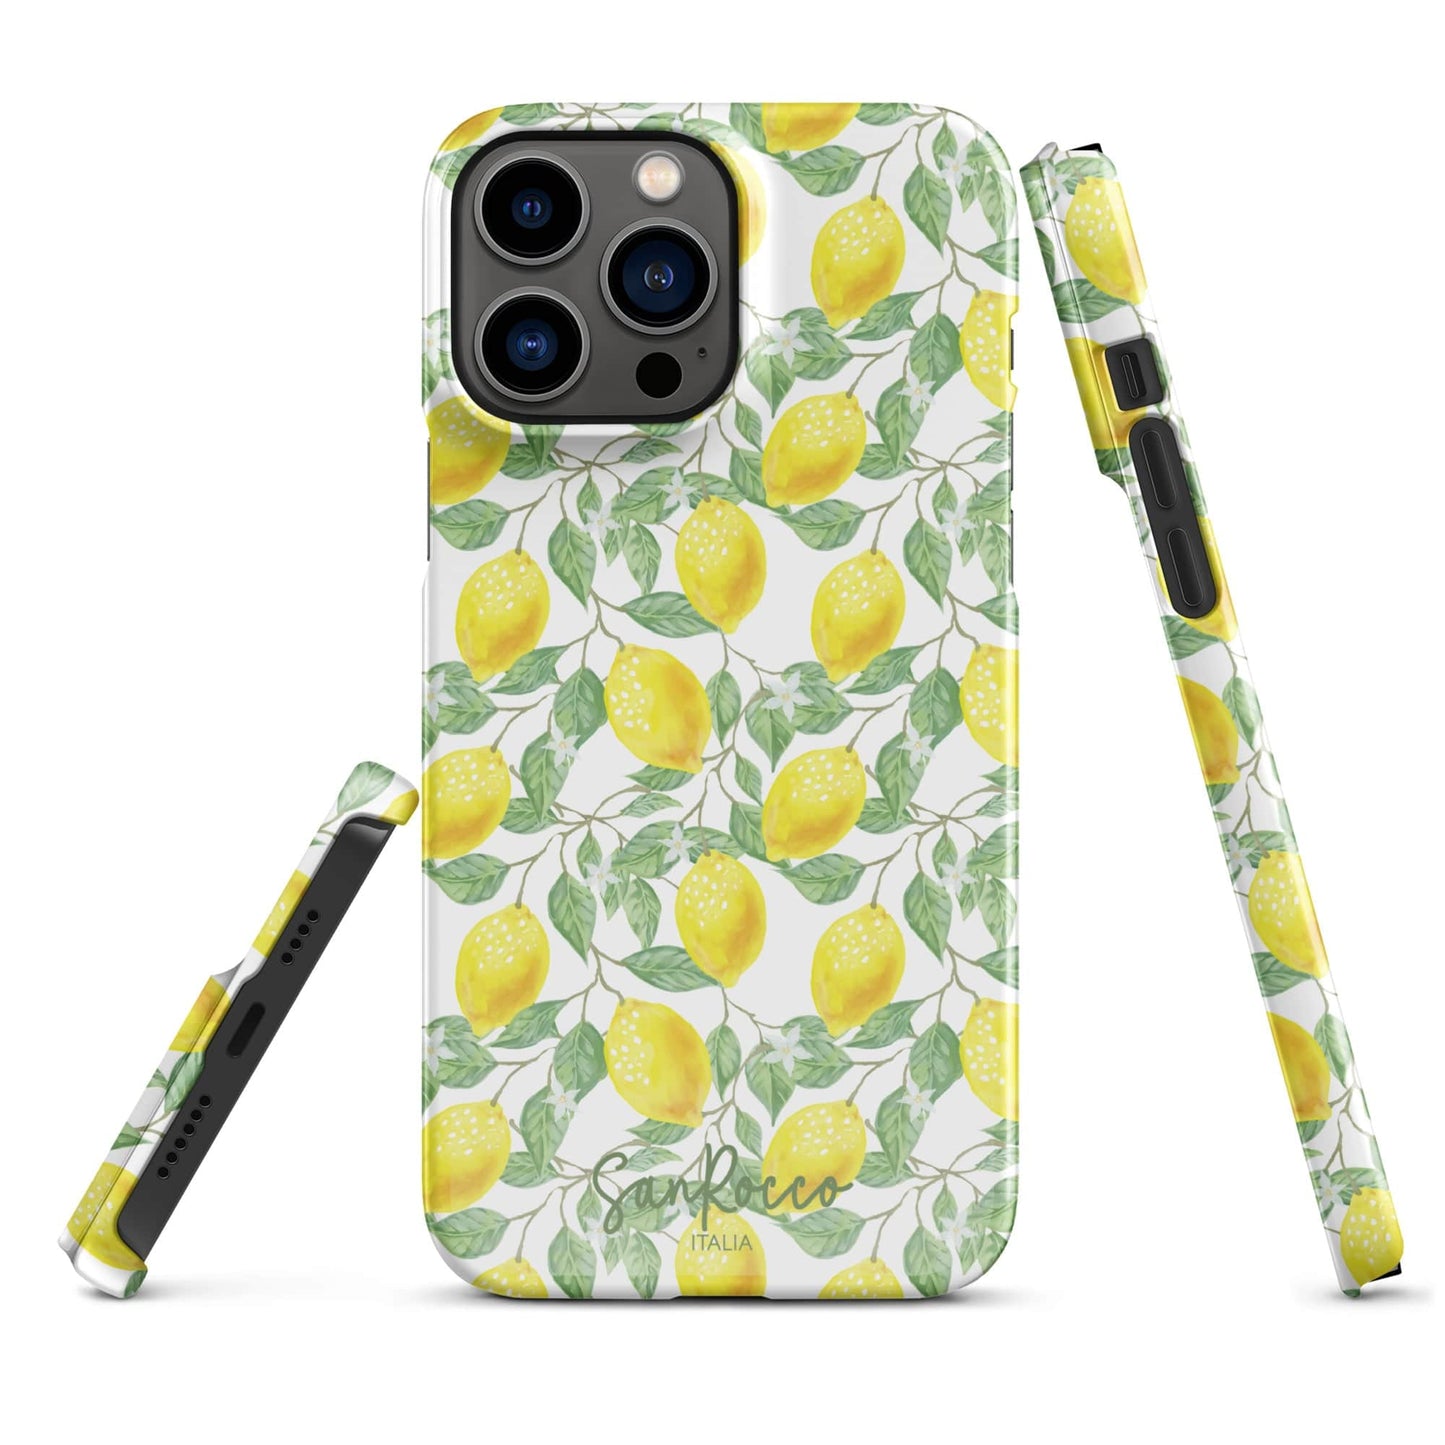 Limoncello Luxe Snap Case for iPhone® - iPhone cases - San Rocco Italia